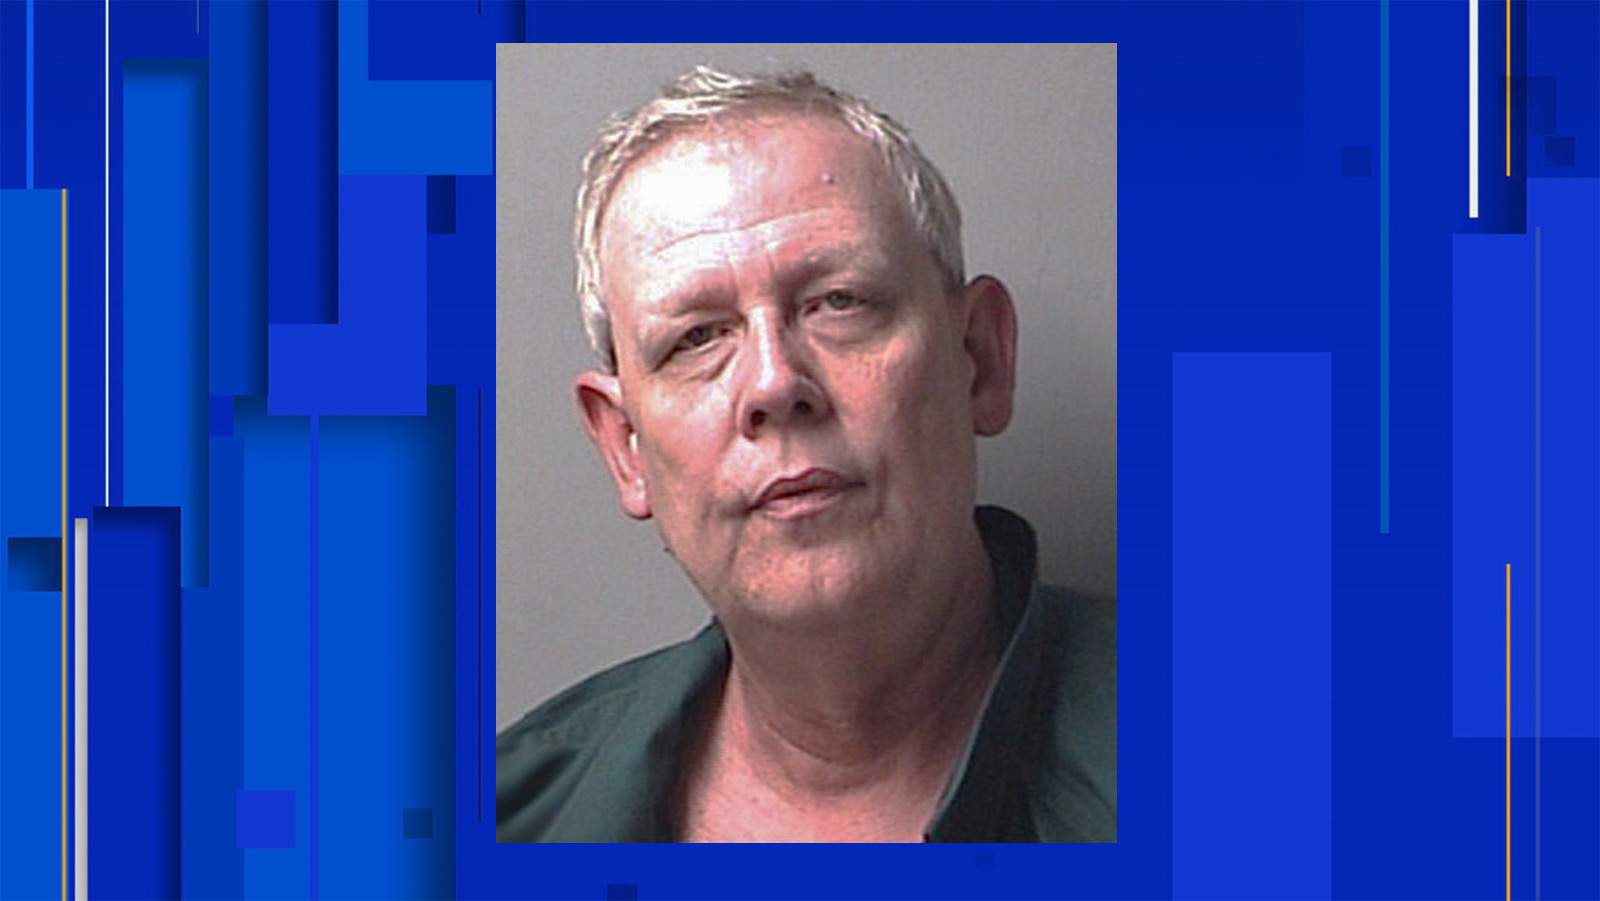 Florida man guilty; used claw hammer, knife to kill family